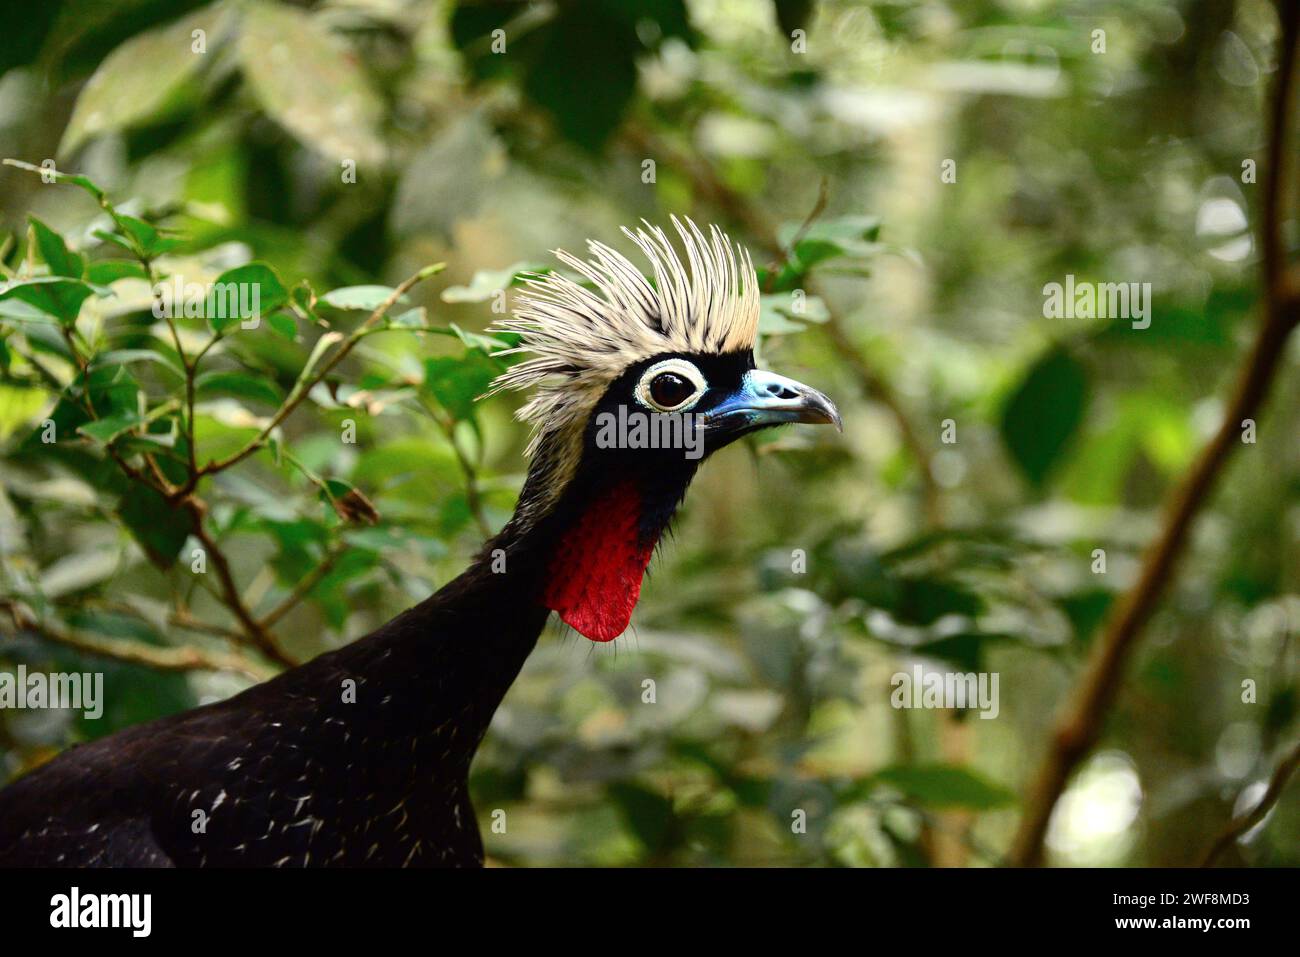 Black-fronted piping guan (Pipile jacutinga) is a bird endemic to Argentina, Brazil and Paraguay. This photo was taken in Brazil. Stock Photo